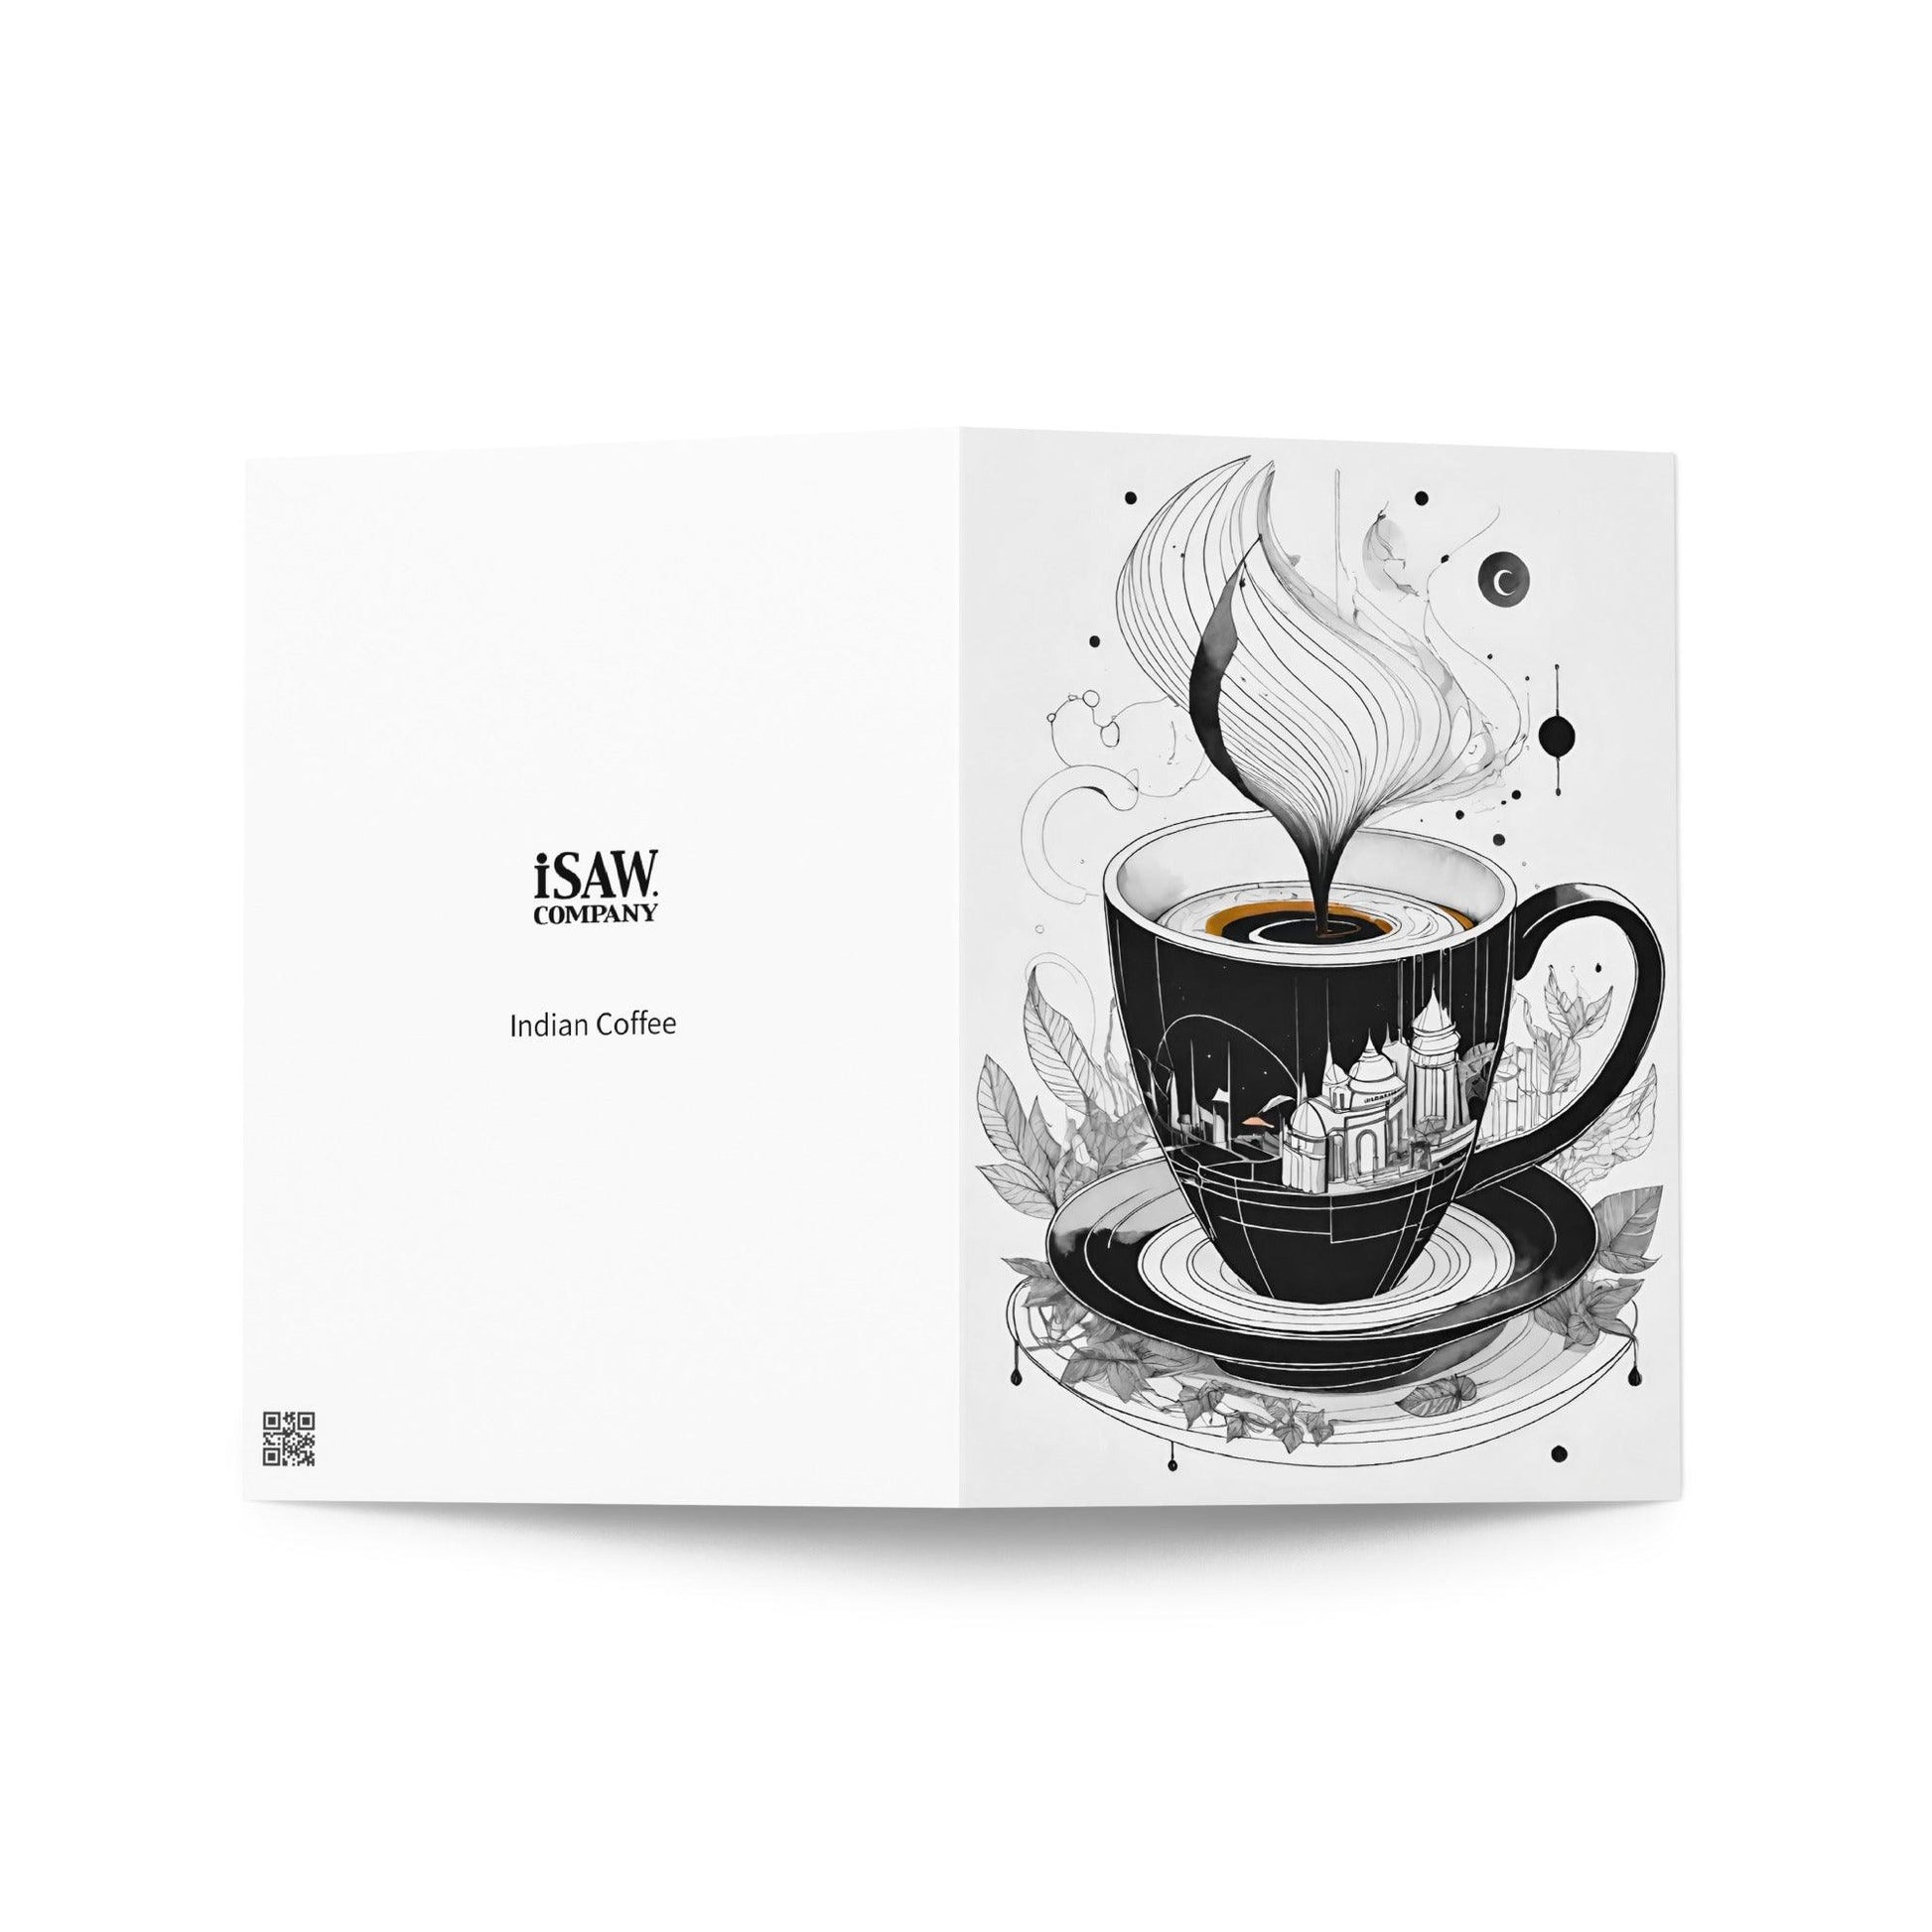 Indian Coffee - Note Card - iSAW Company